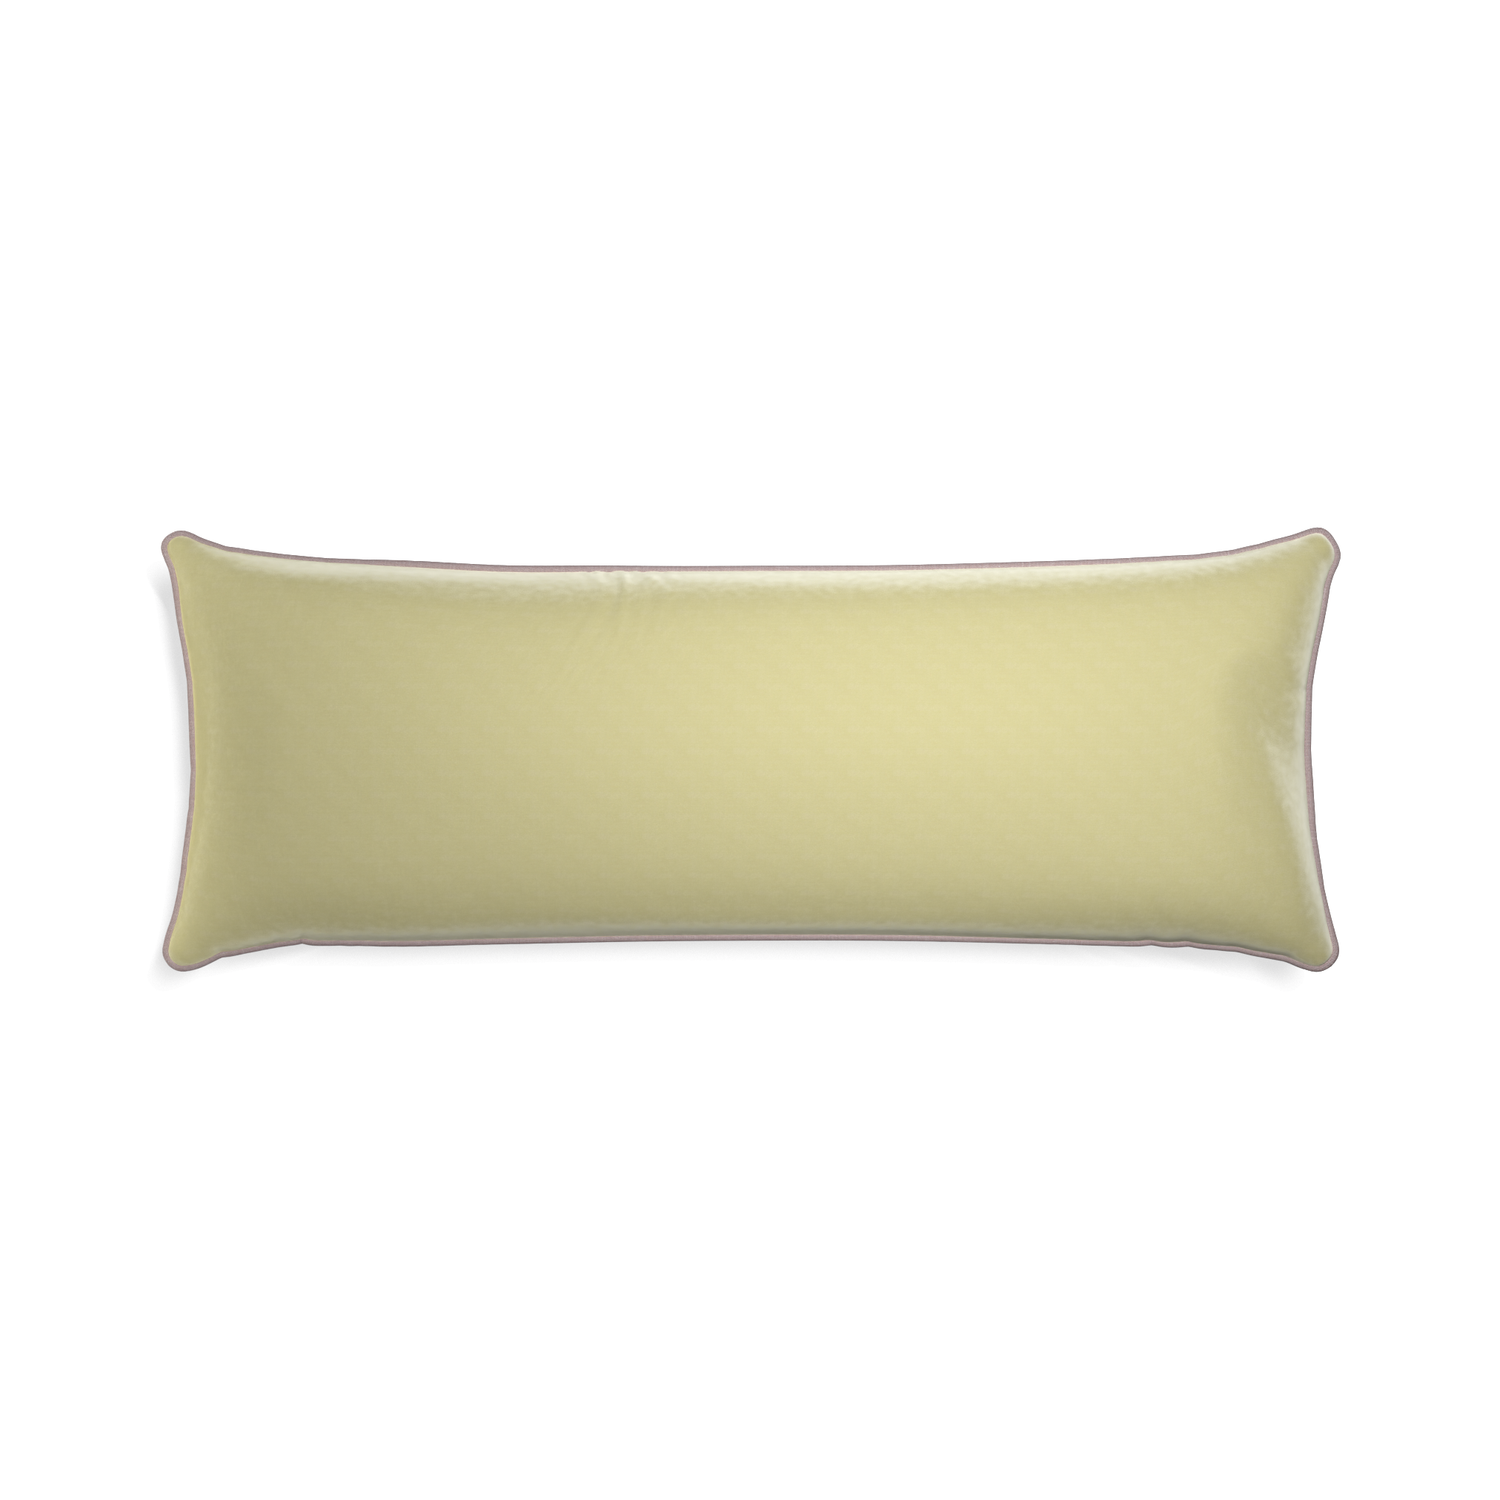 Xl-lumbar pear velvet custom light greenpillow with orchid piping on white background